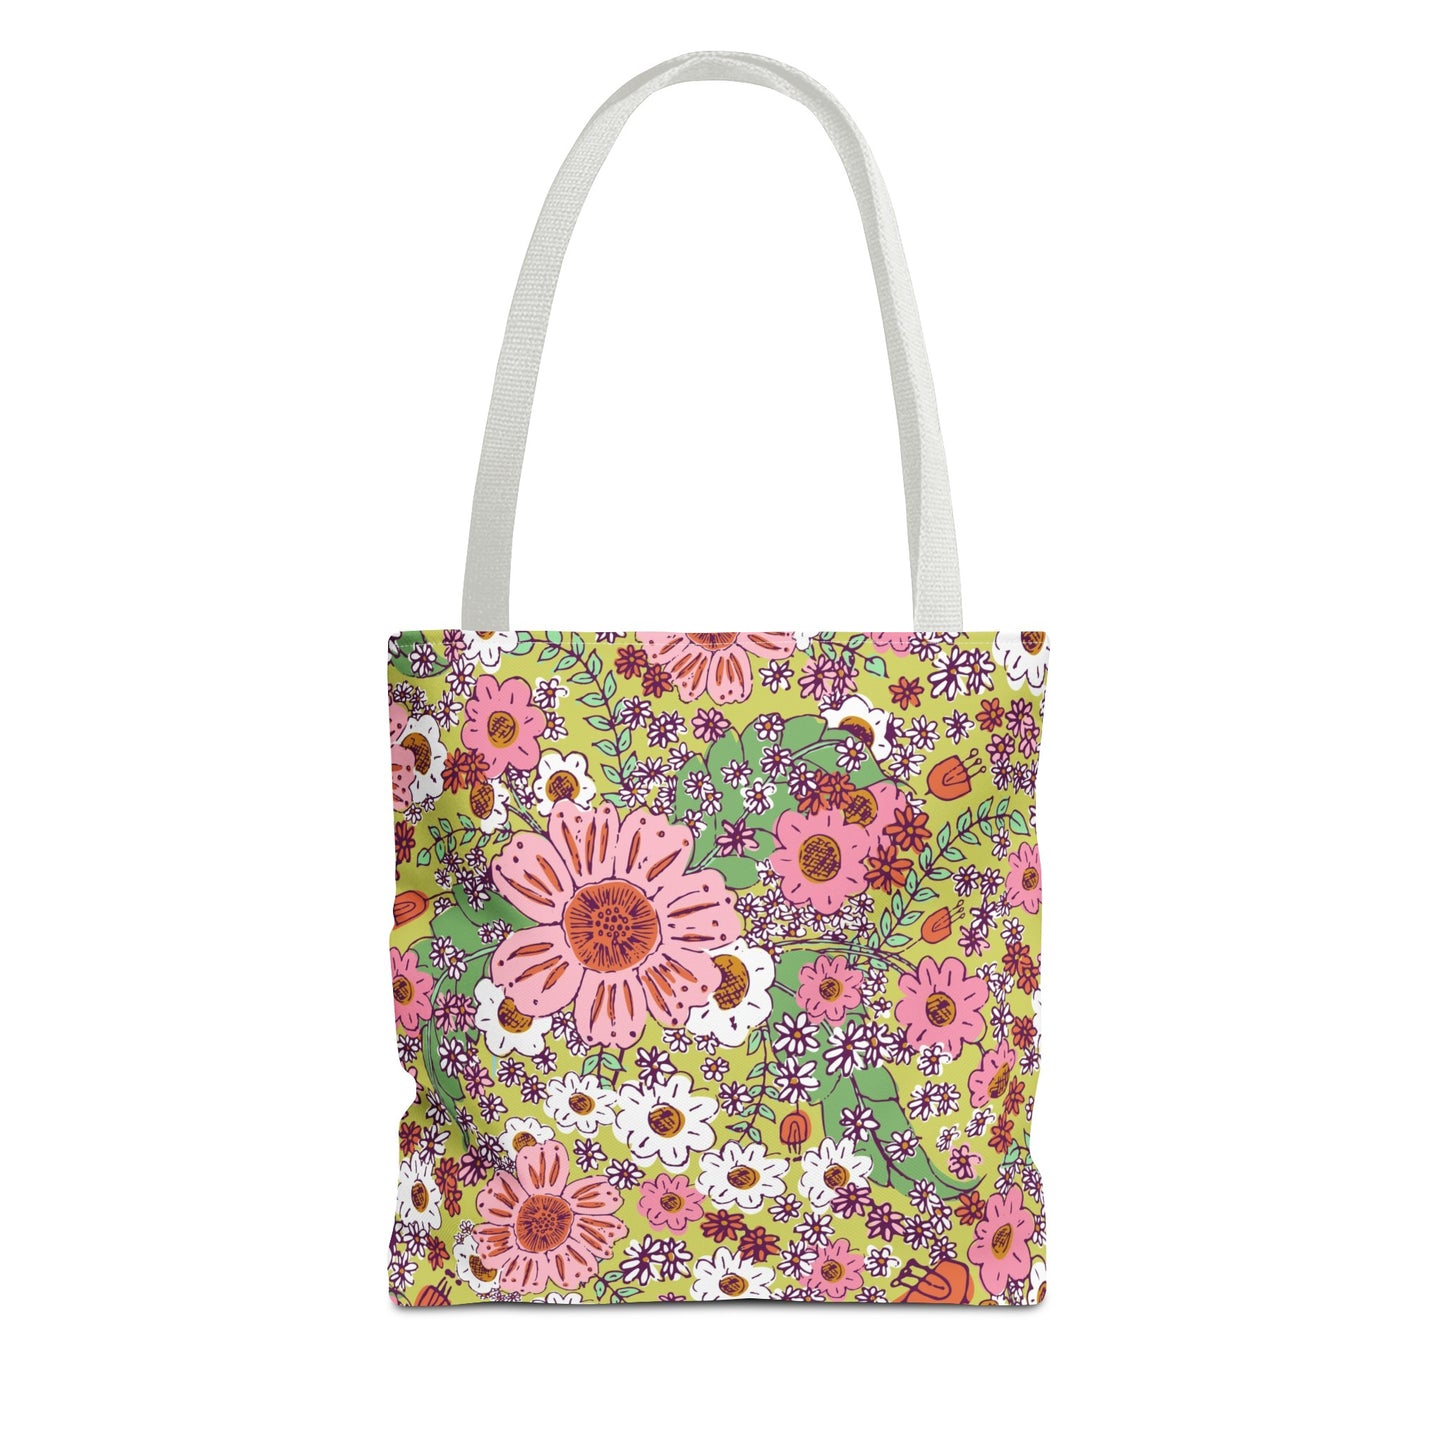 Cheerful Watercolor Flowers on Bright Green Tote Bag